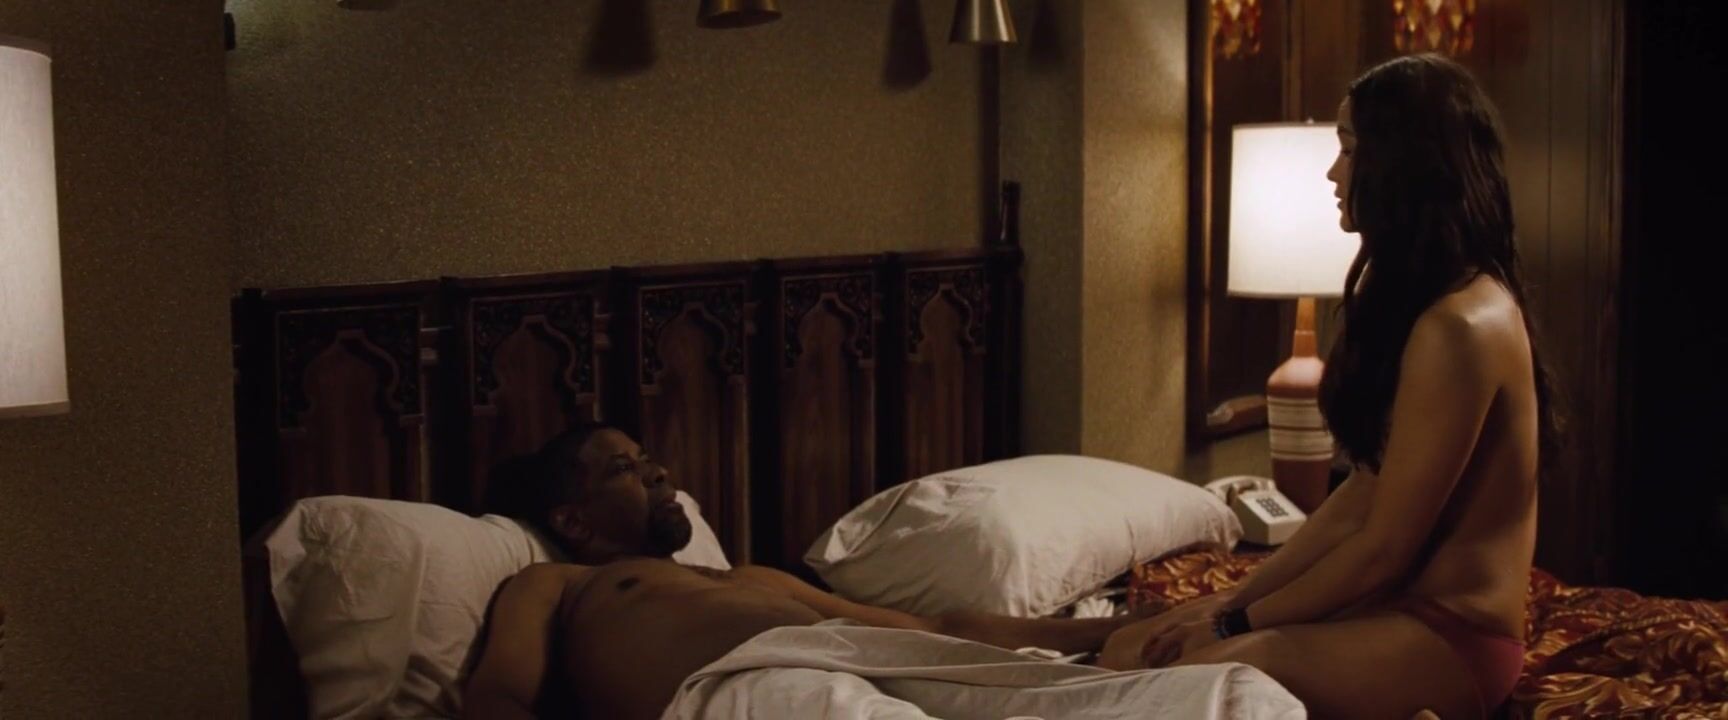 EroticBeauties Paula Patton manages to excite black man during the naked moment from 2 Guns movie AdultEmpire